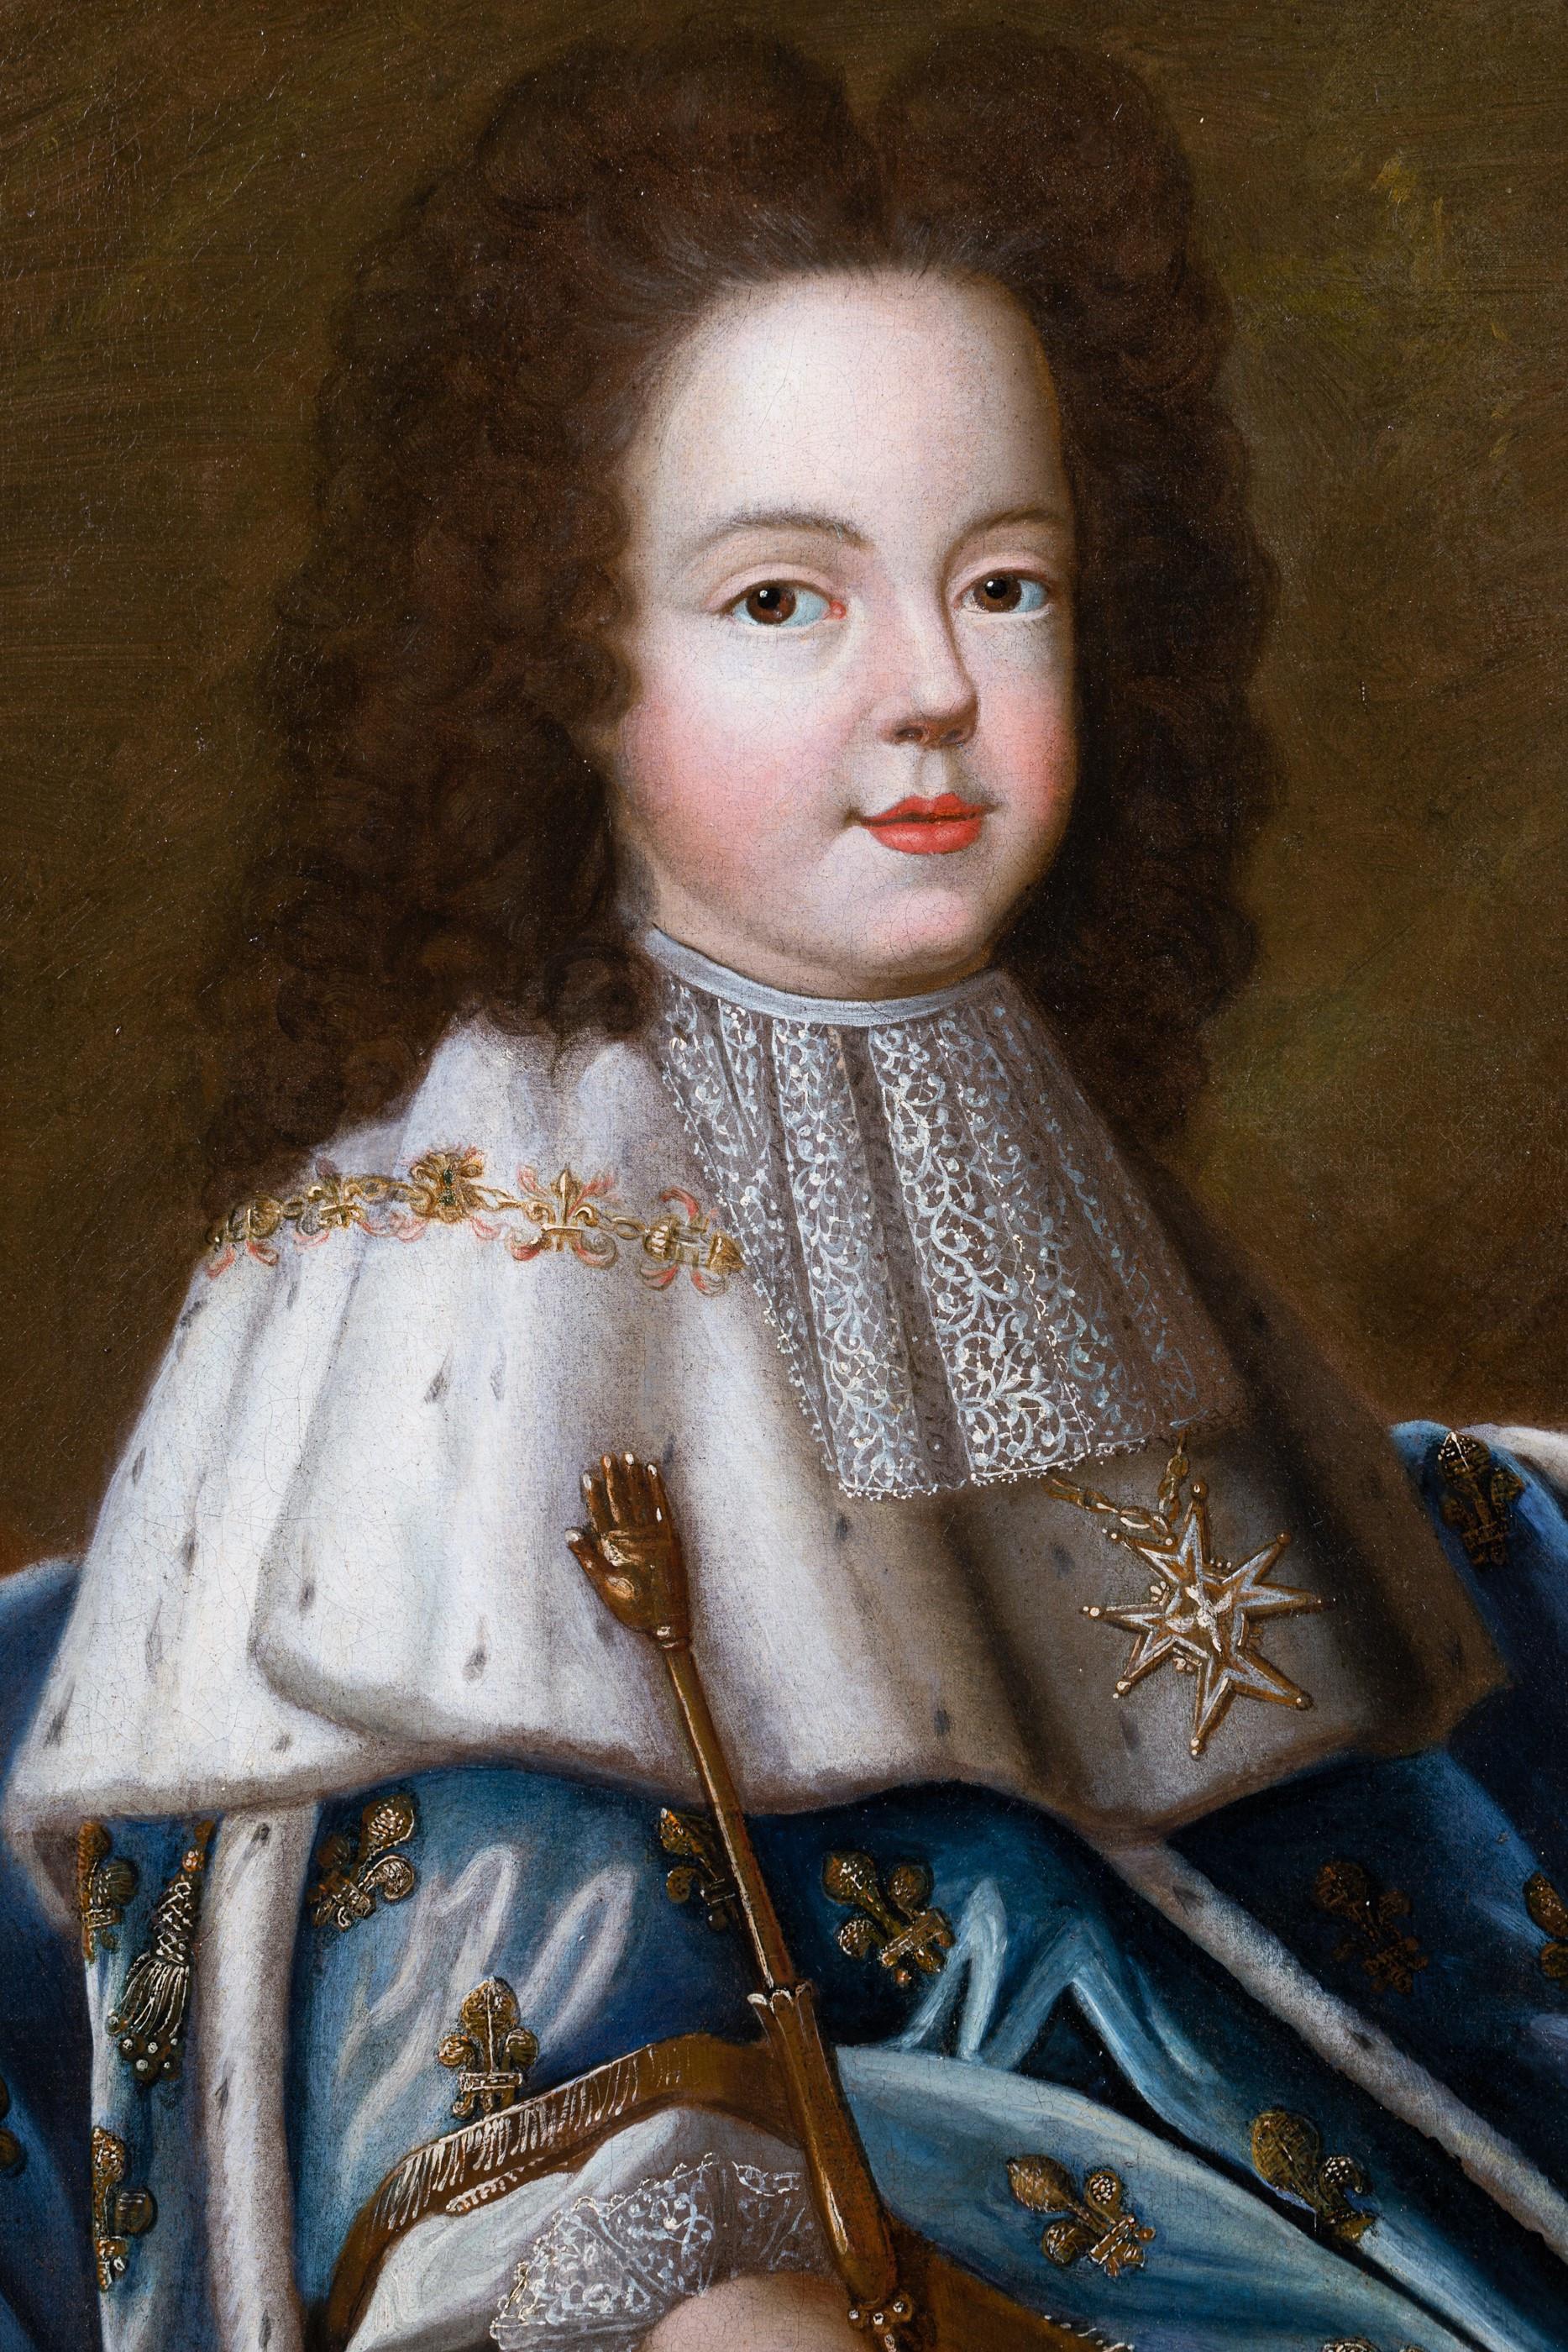 Louis XV as a child, workshop of Pierre Gobert, c. 1716, 18th c. French School 1